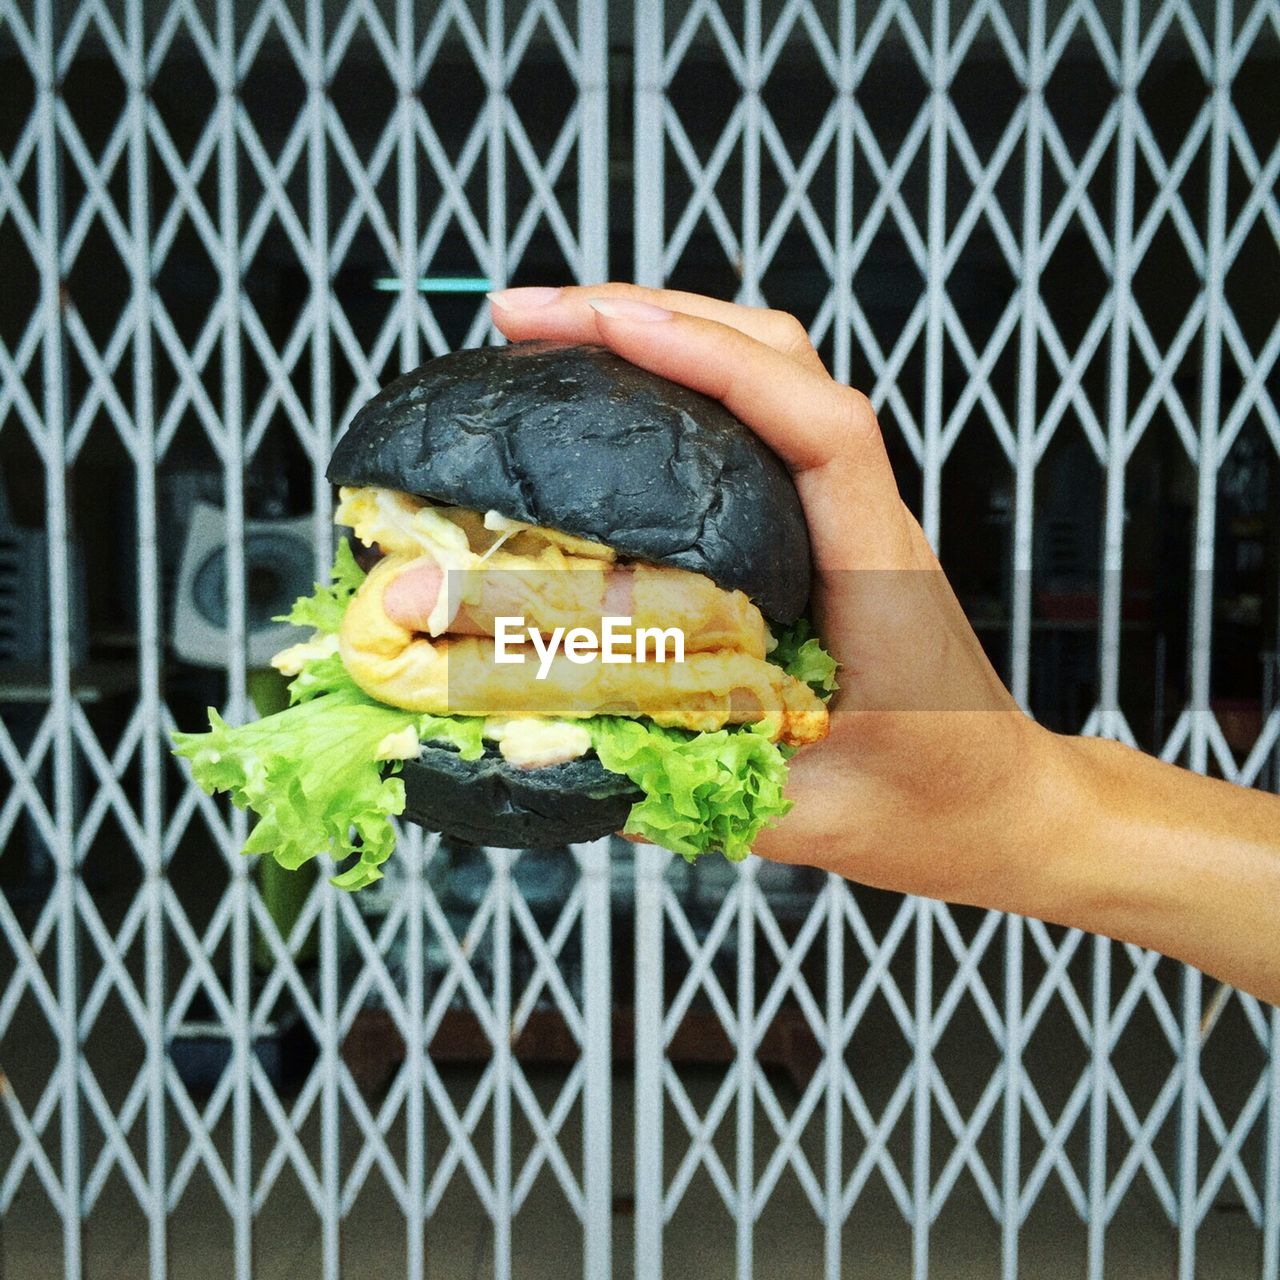 Cropped image of hand holding black burger against gate